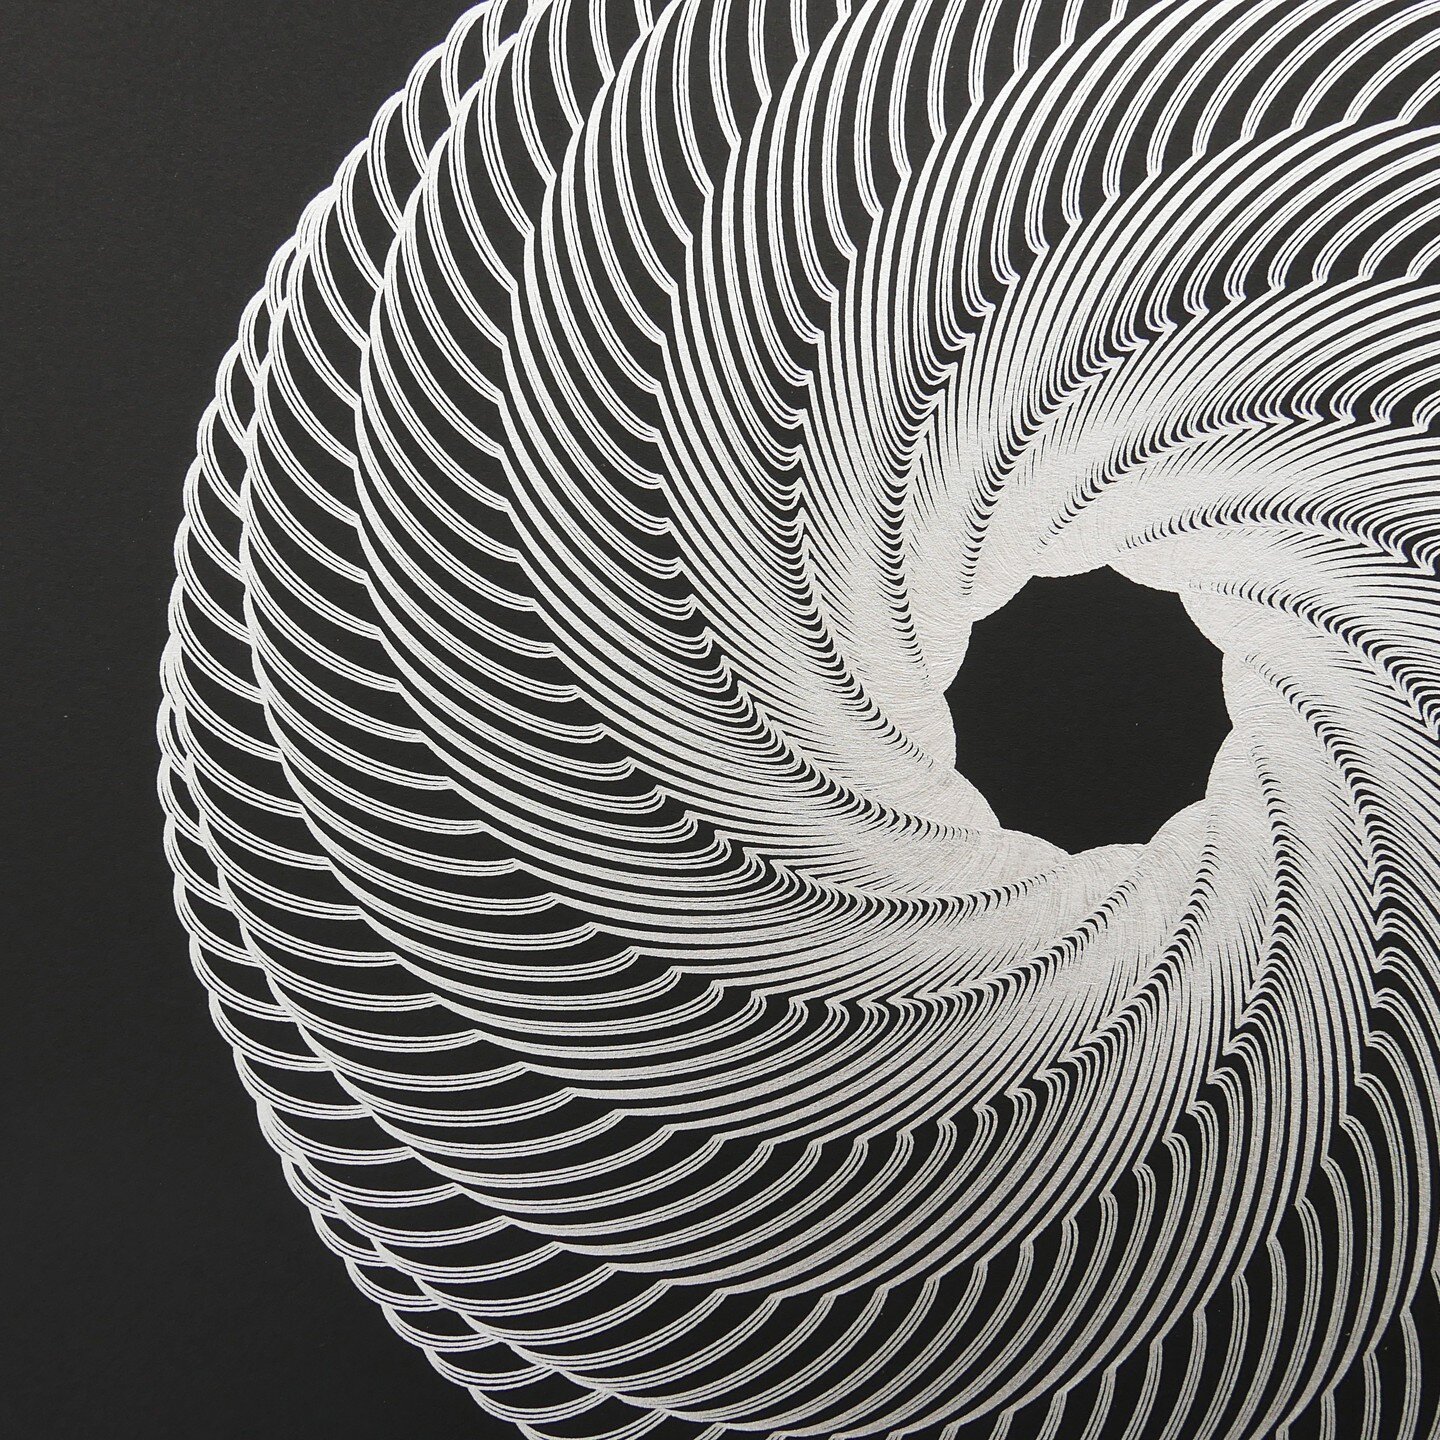 M&ouml;bius Vortex #3

Adding a bit more texture and flow into the Mobius. Very happy with this one!
.
420 x 297mm
Silver on Black
Signo UM-153 on Fabriano Black Black 300gsm with Axidraw V3
.
Shop: www.CraftedByCode.com